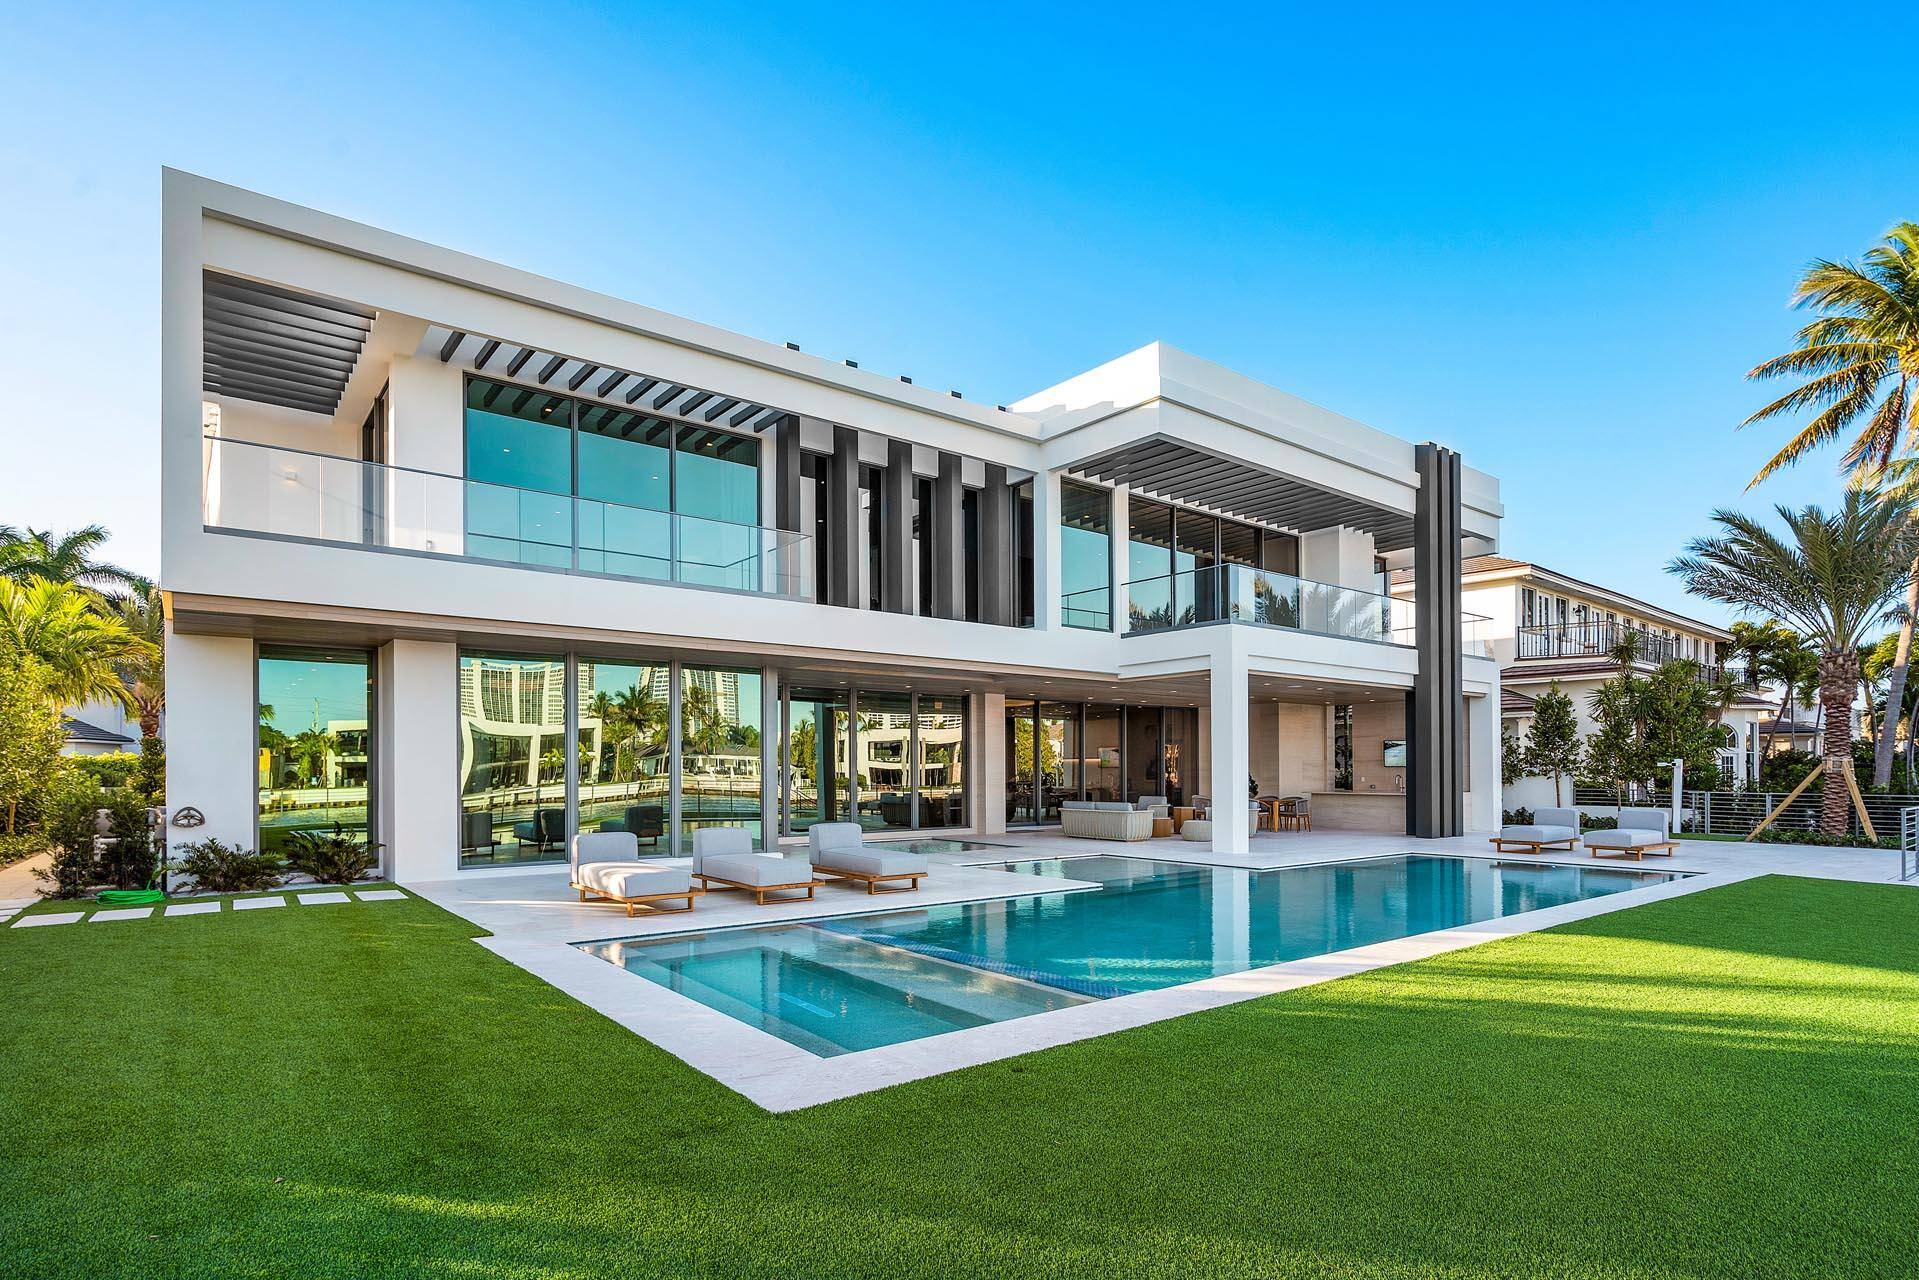 Built by Sarkela Corporation and Randall Stofft architecture, this extraordinary Intracoastal property has over 9, 600 sf of living space, 6 bedrooms, 7 full and 2 half bathrooms.